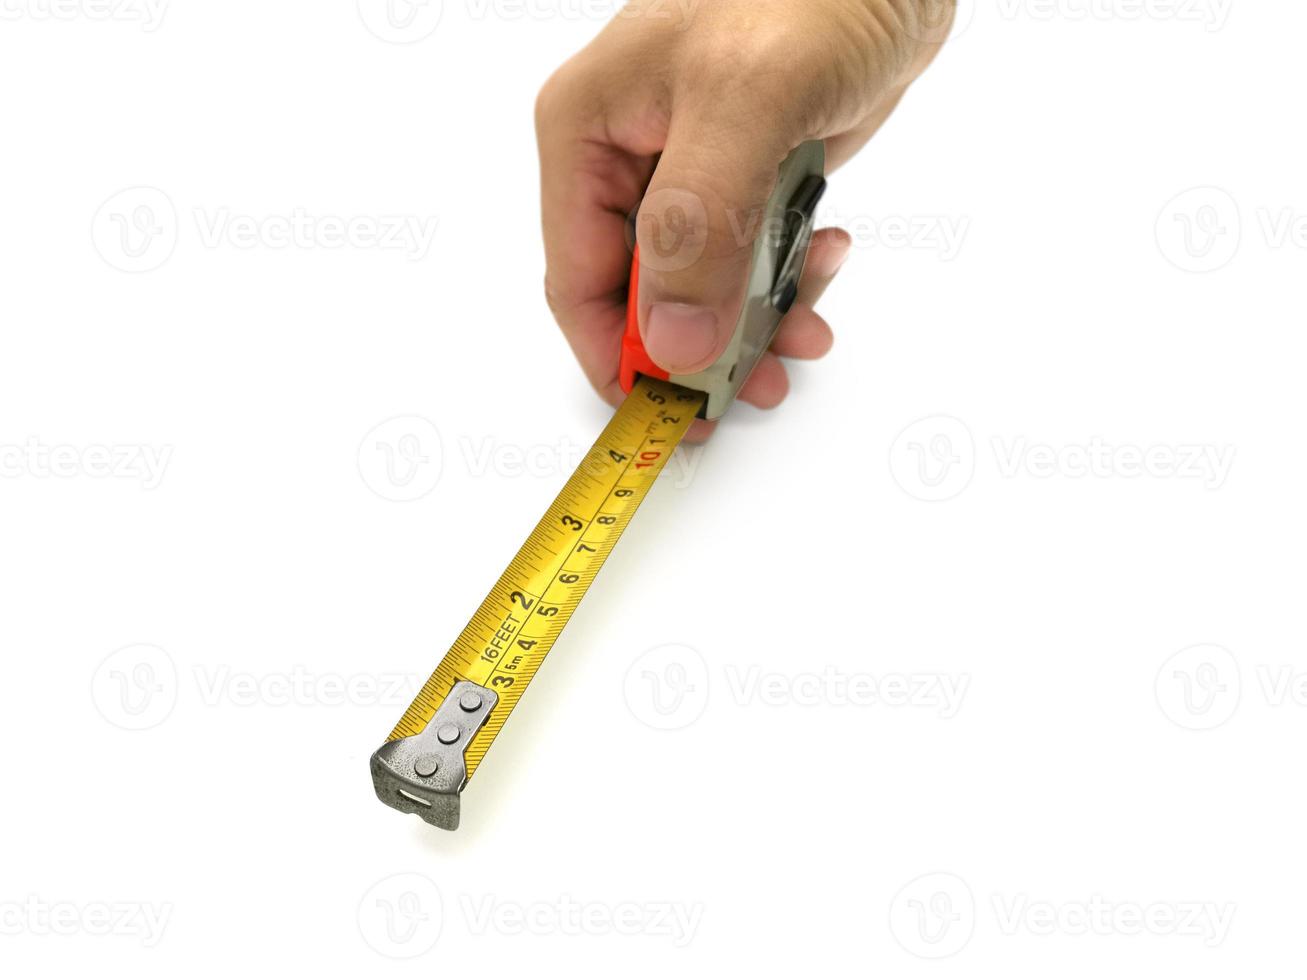 Construction roulette in hands on white background photo